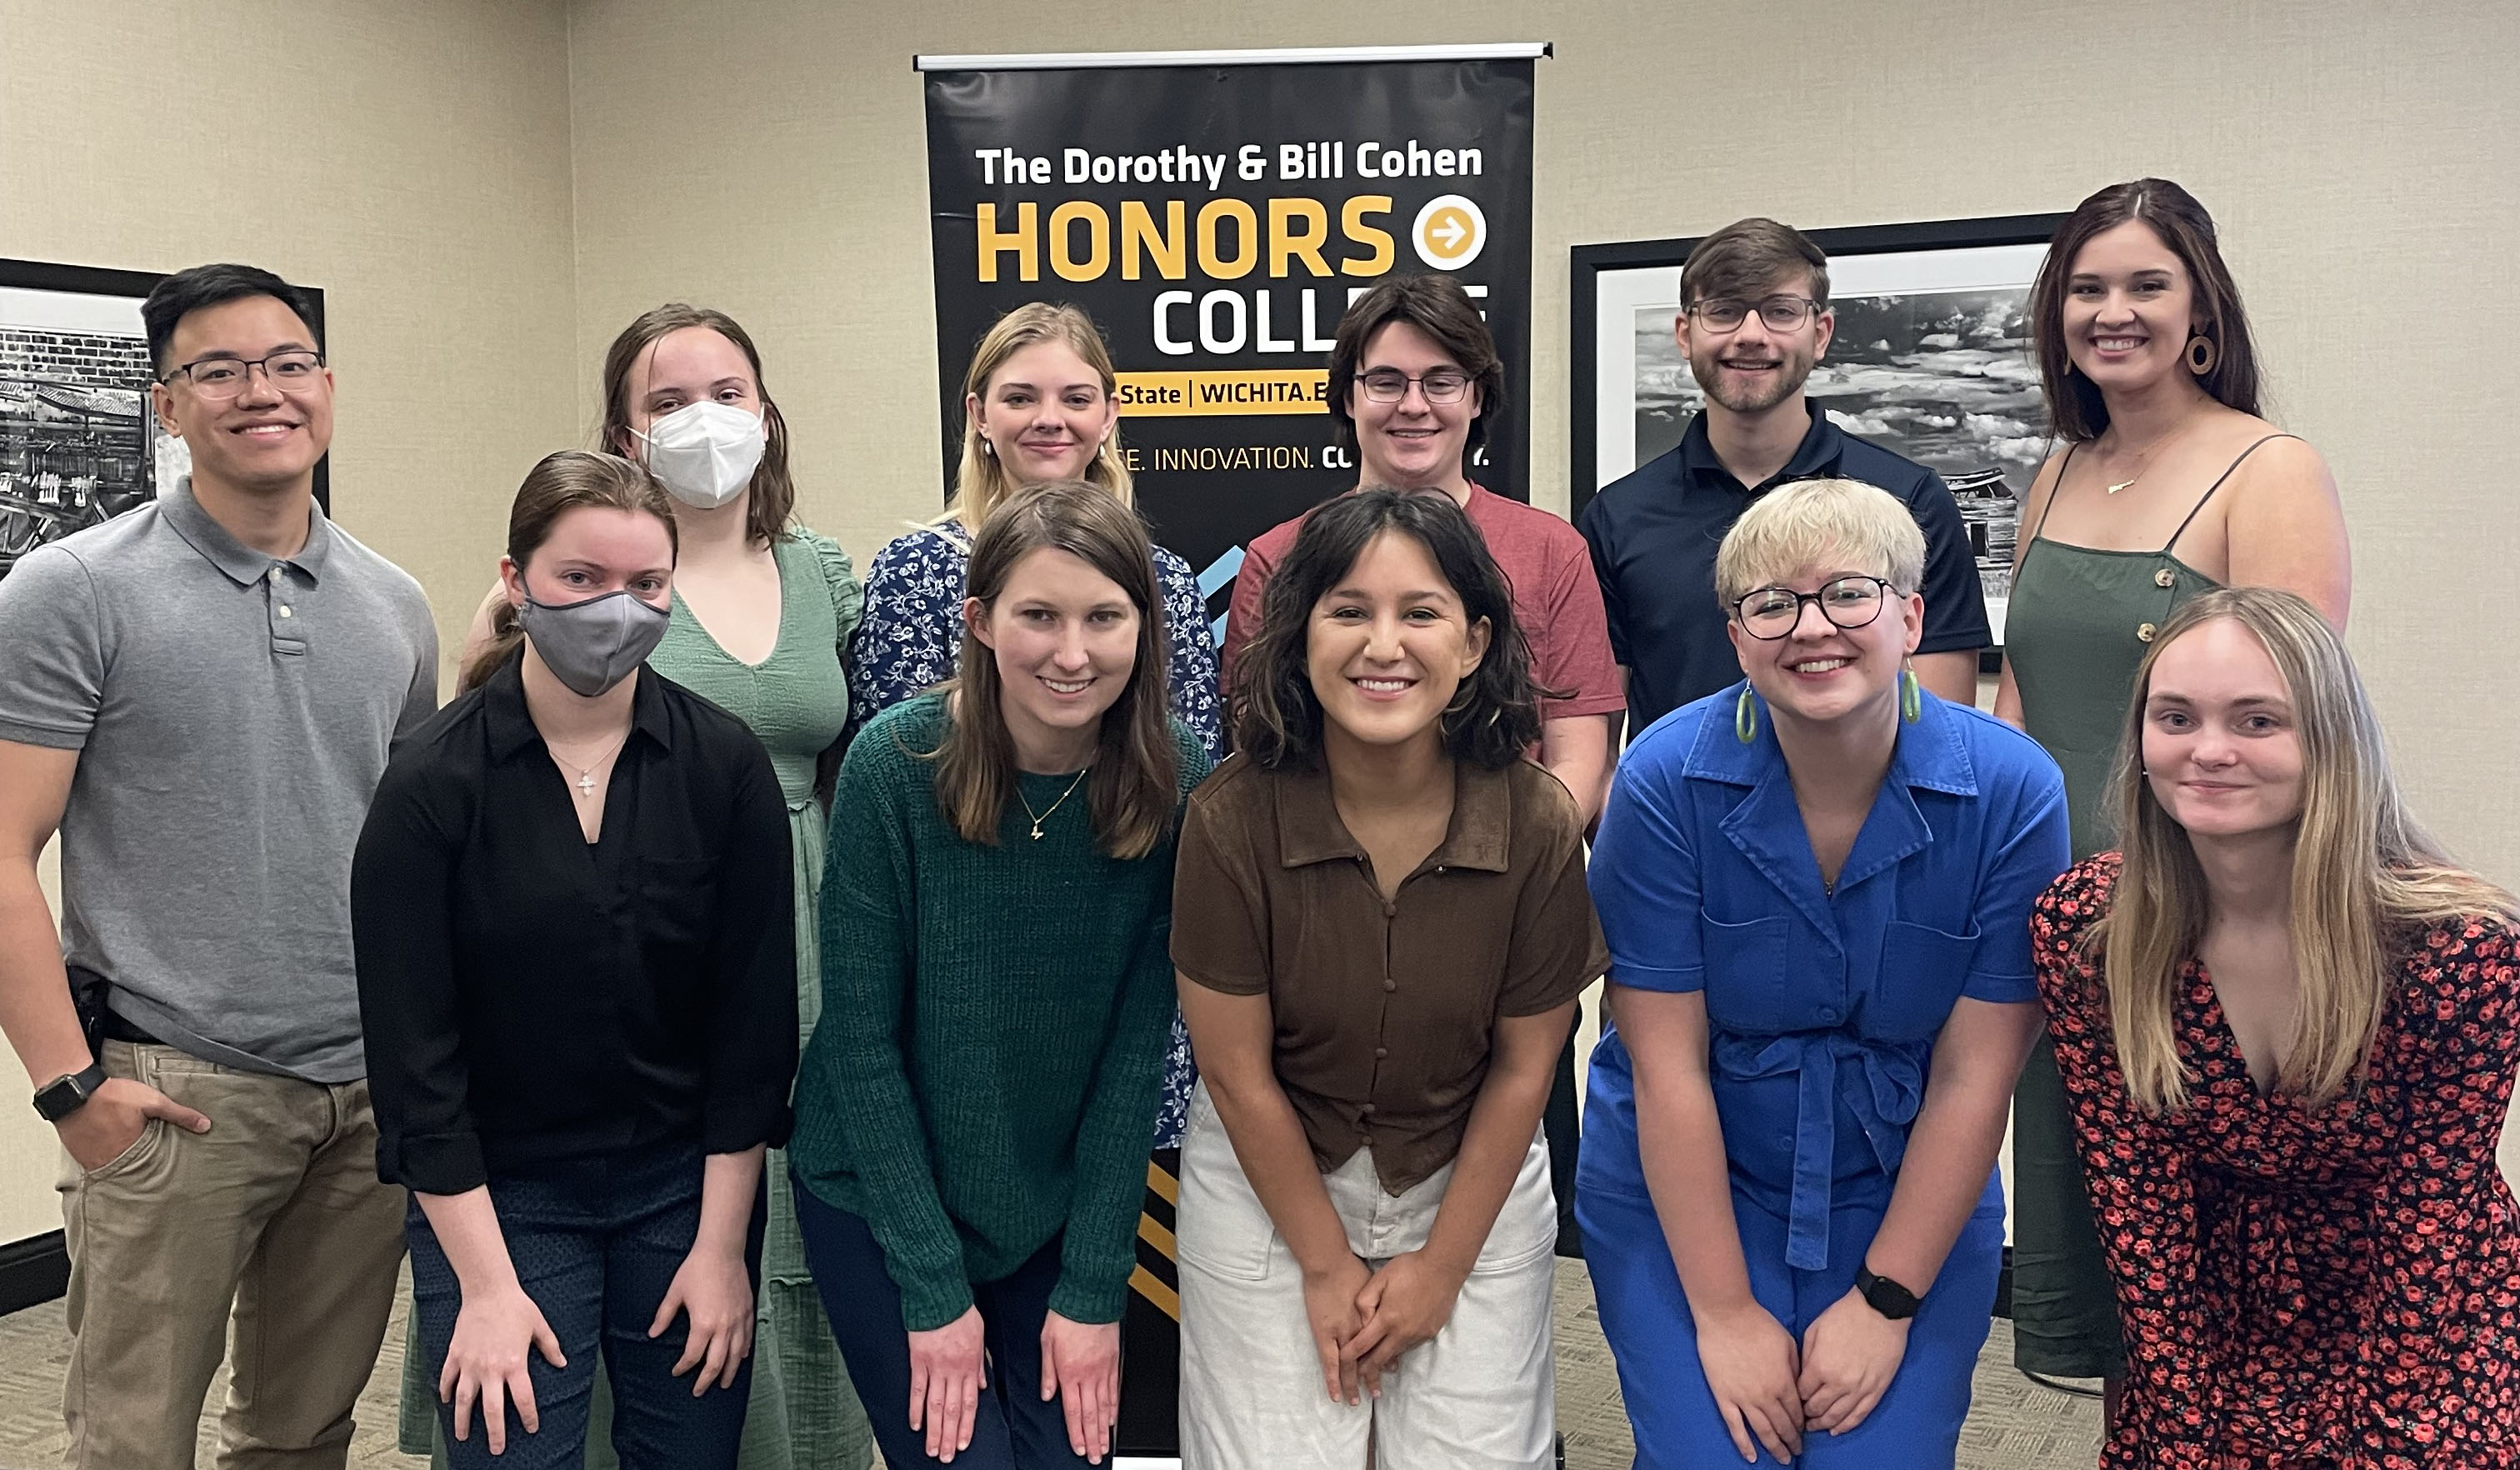 A group of 11 graduating Honors students posing for a photo at the Donuts, Coffee, and Kudos Celebration event. Pictured left to right are: Ngoc Vuong, Analisa Bridge, Jadie Chauncey, Madeline Smith, Ella Ihrig, Savannah Redfern, Matthew Anderson, Savannah Gann, Franklin Hurst, Ava Munzinger-DeFrain, and Sydney Wyatt.